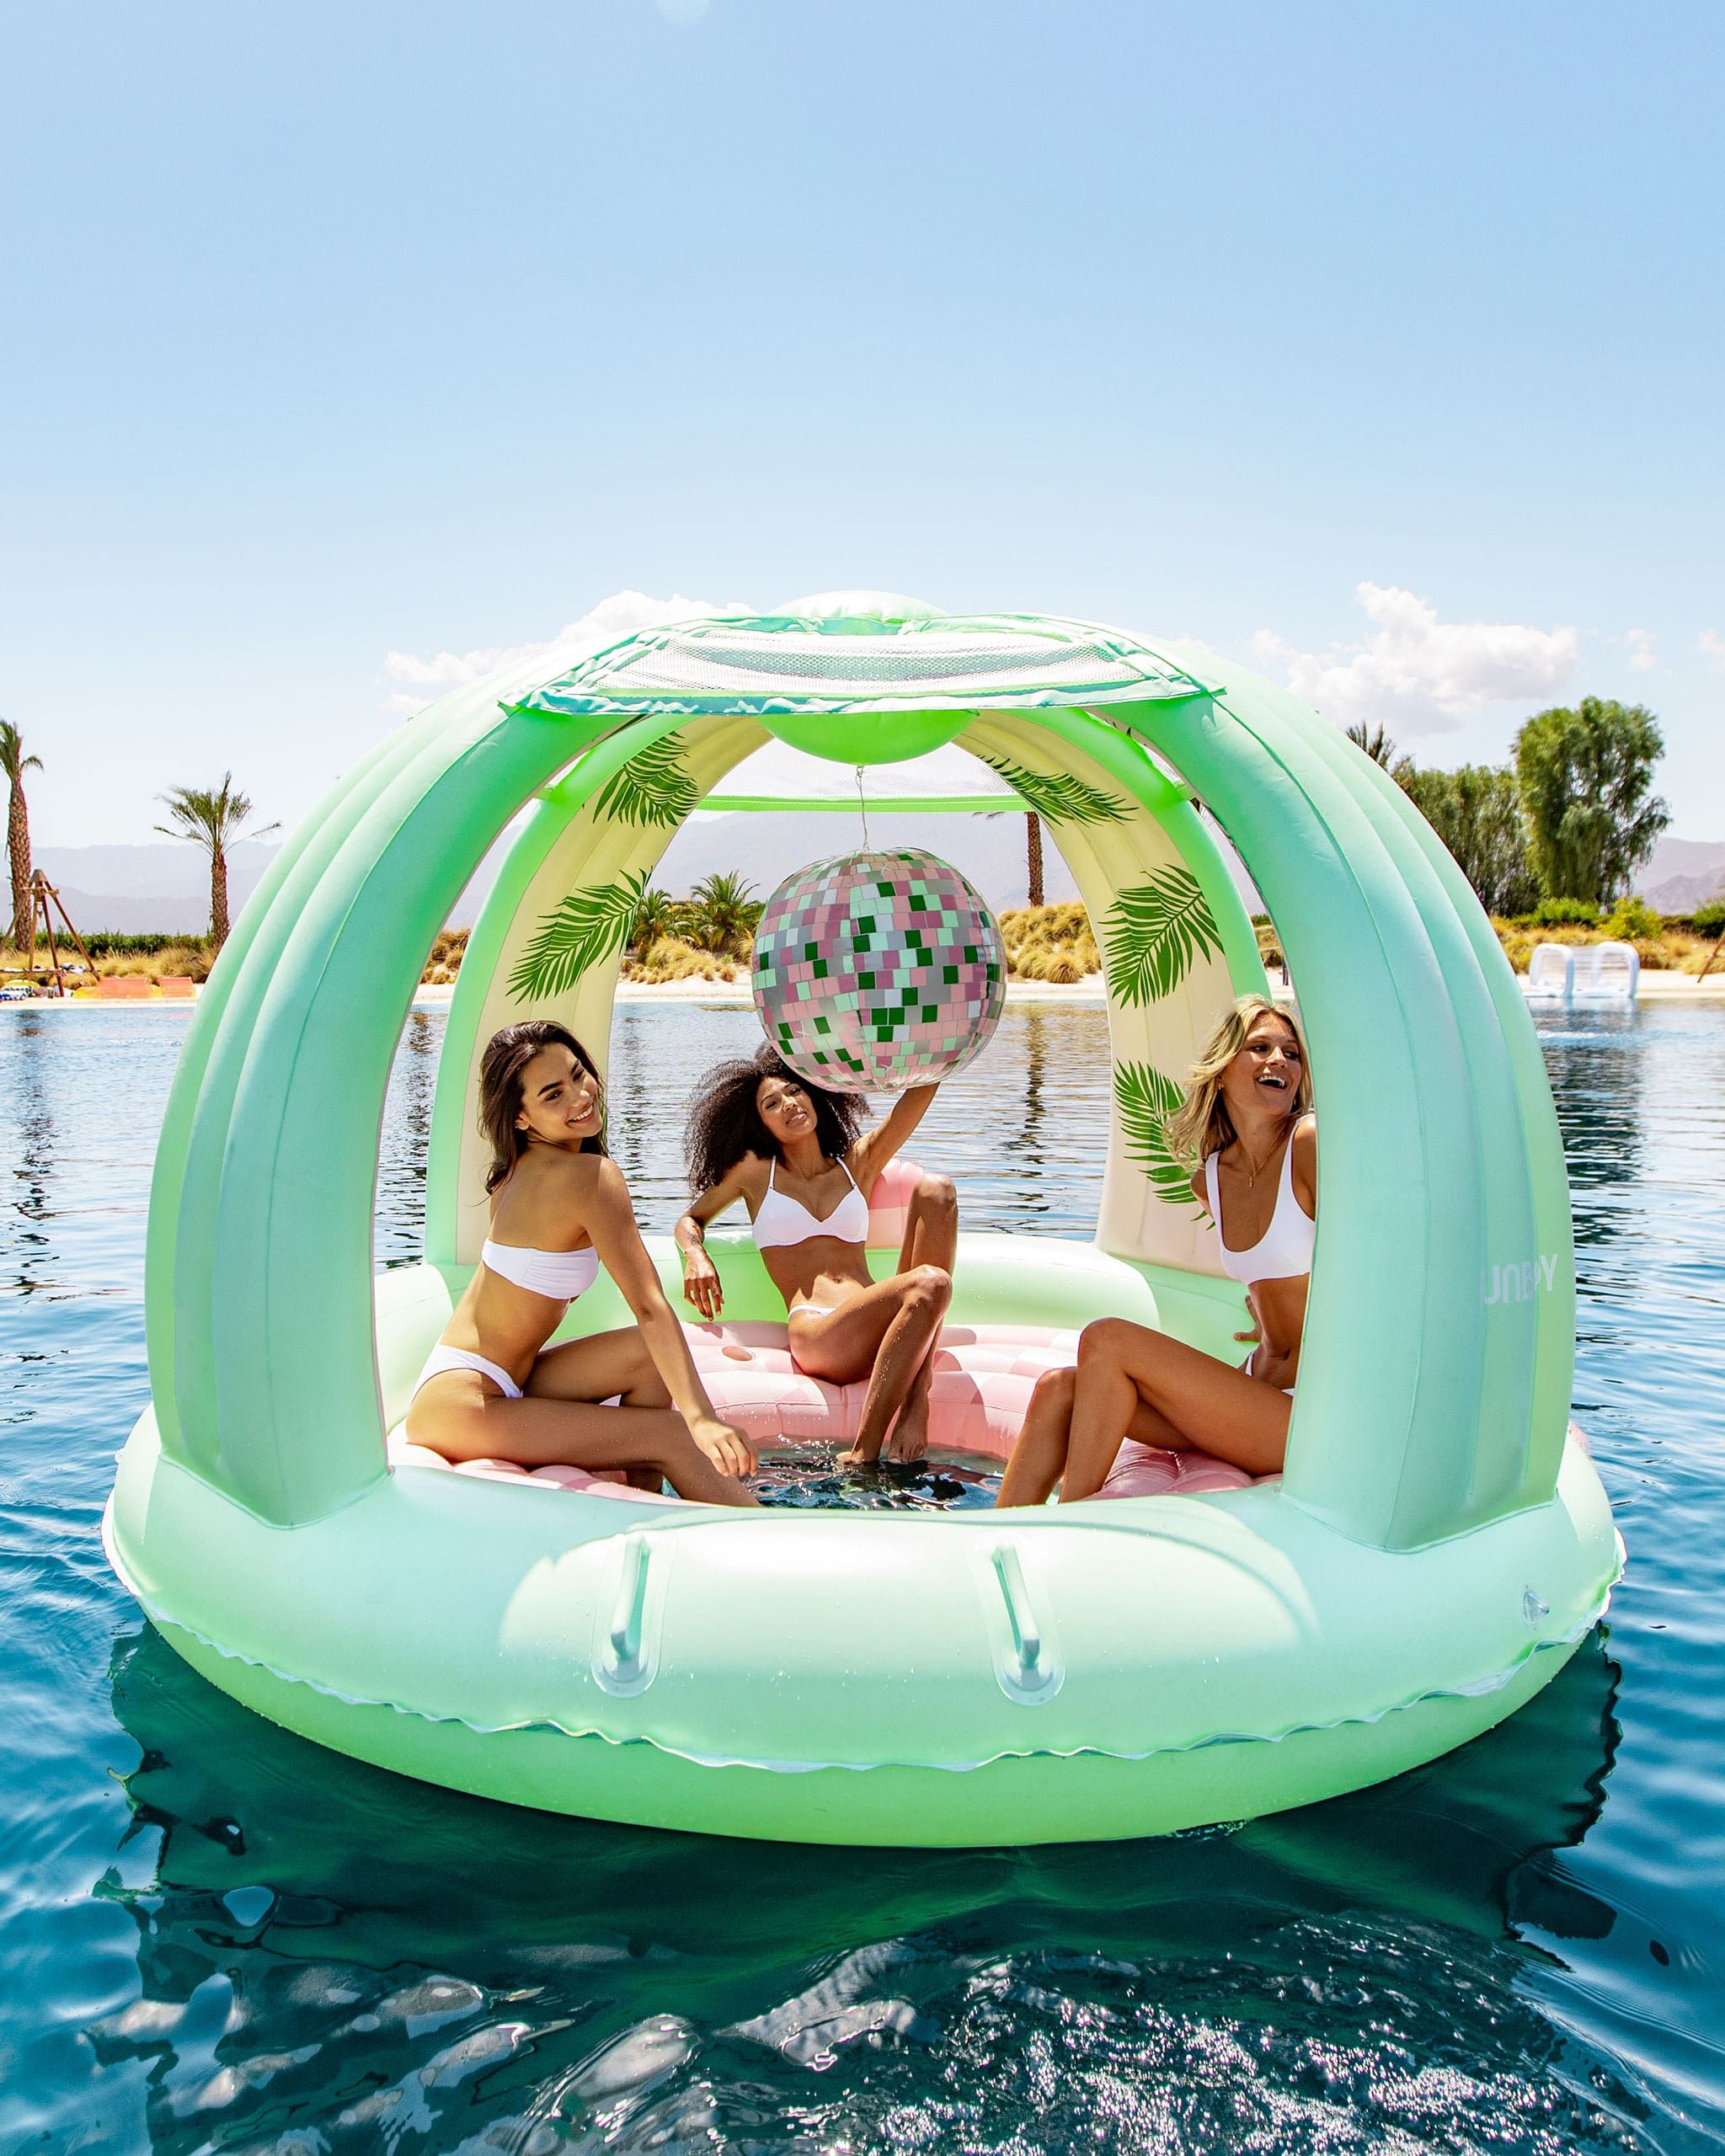 Pool Floaties Inflatable Rafts Summer Swimming Lounge Pool Floatie Beach Floaty Party Toys for Adult Kids